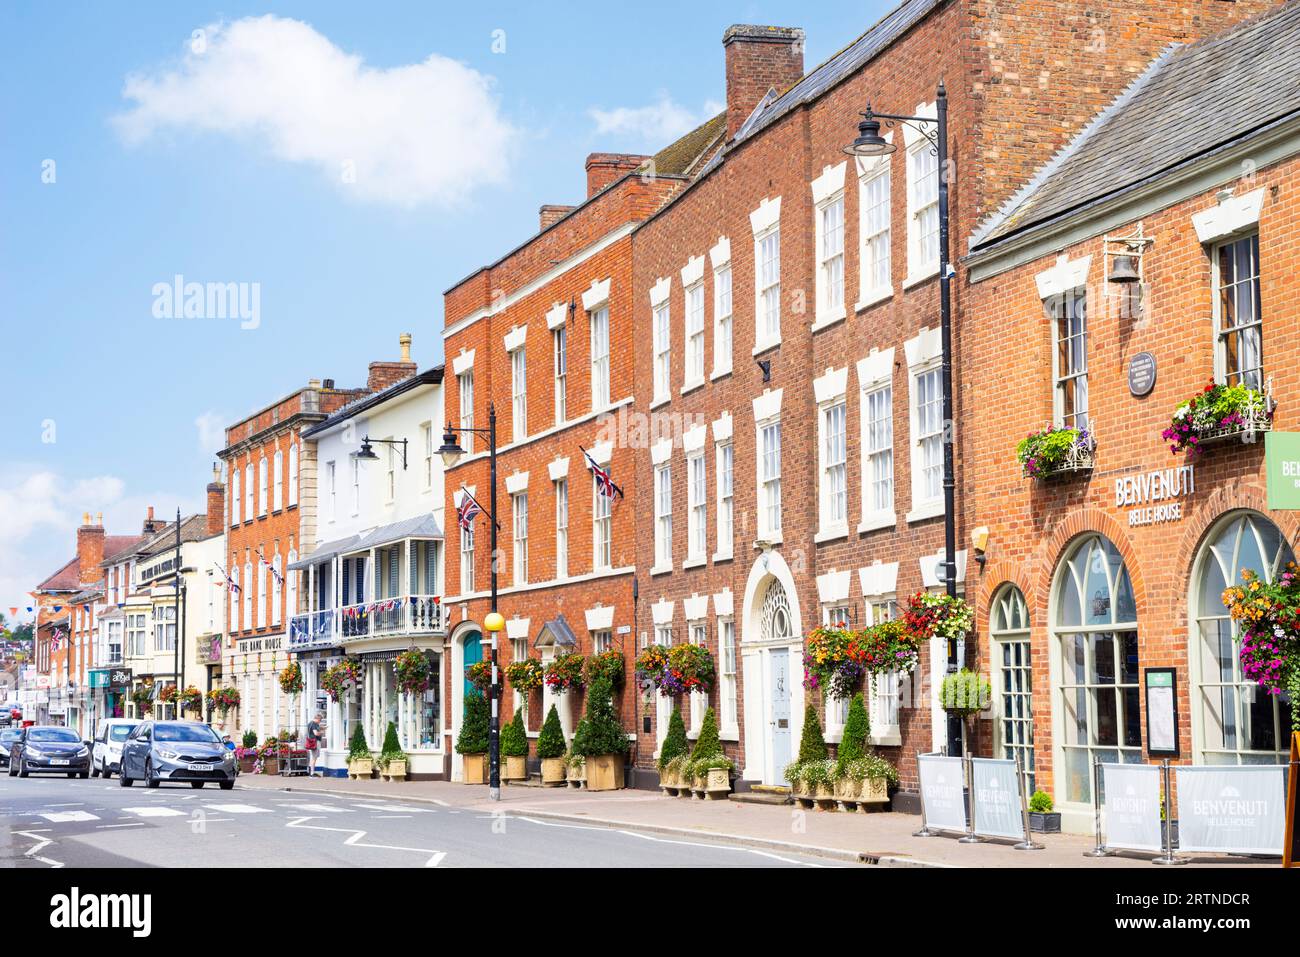 Pershore Bridge street Pershore town centre businesses and shops Worcestershire England UK GB Europe Stock Photo